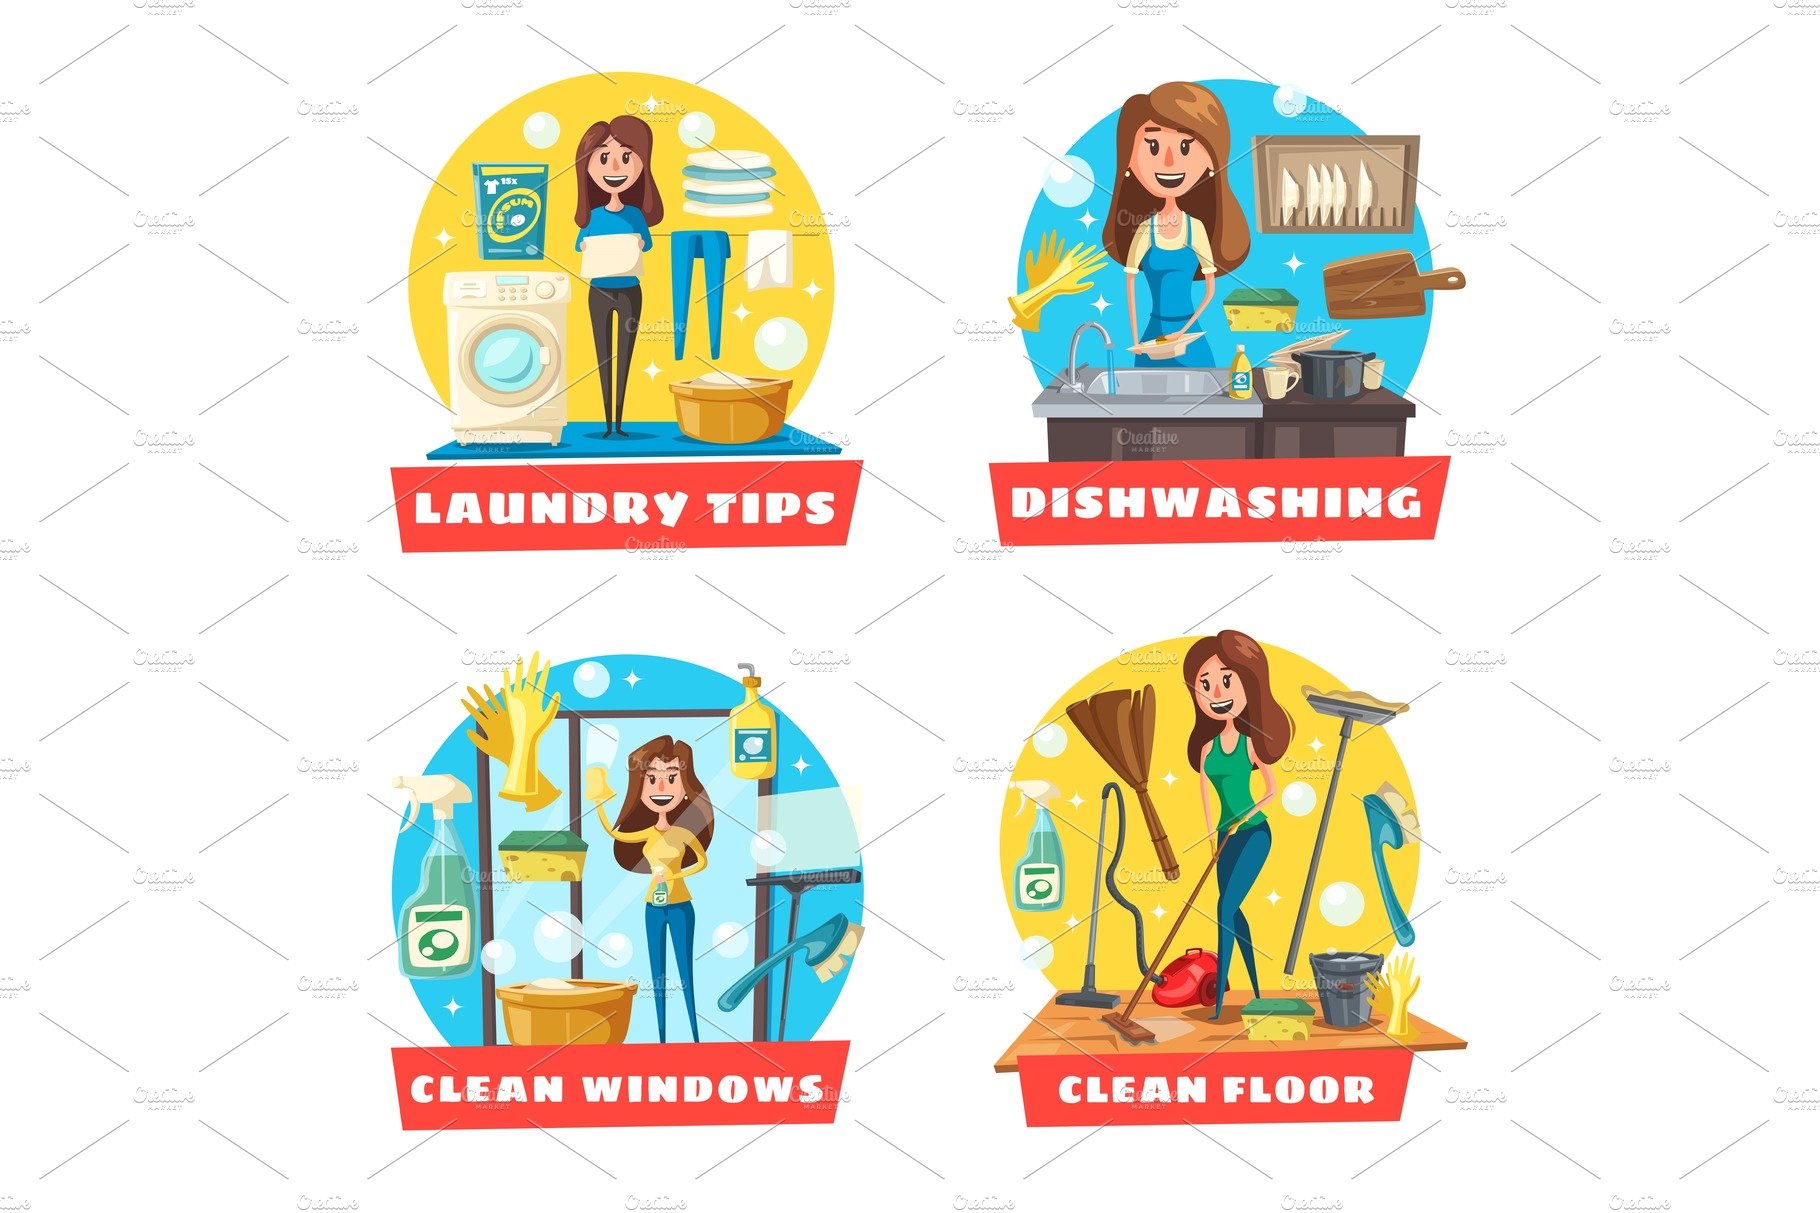 Window and floor cleaning, laundry cover image.